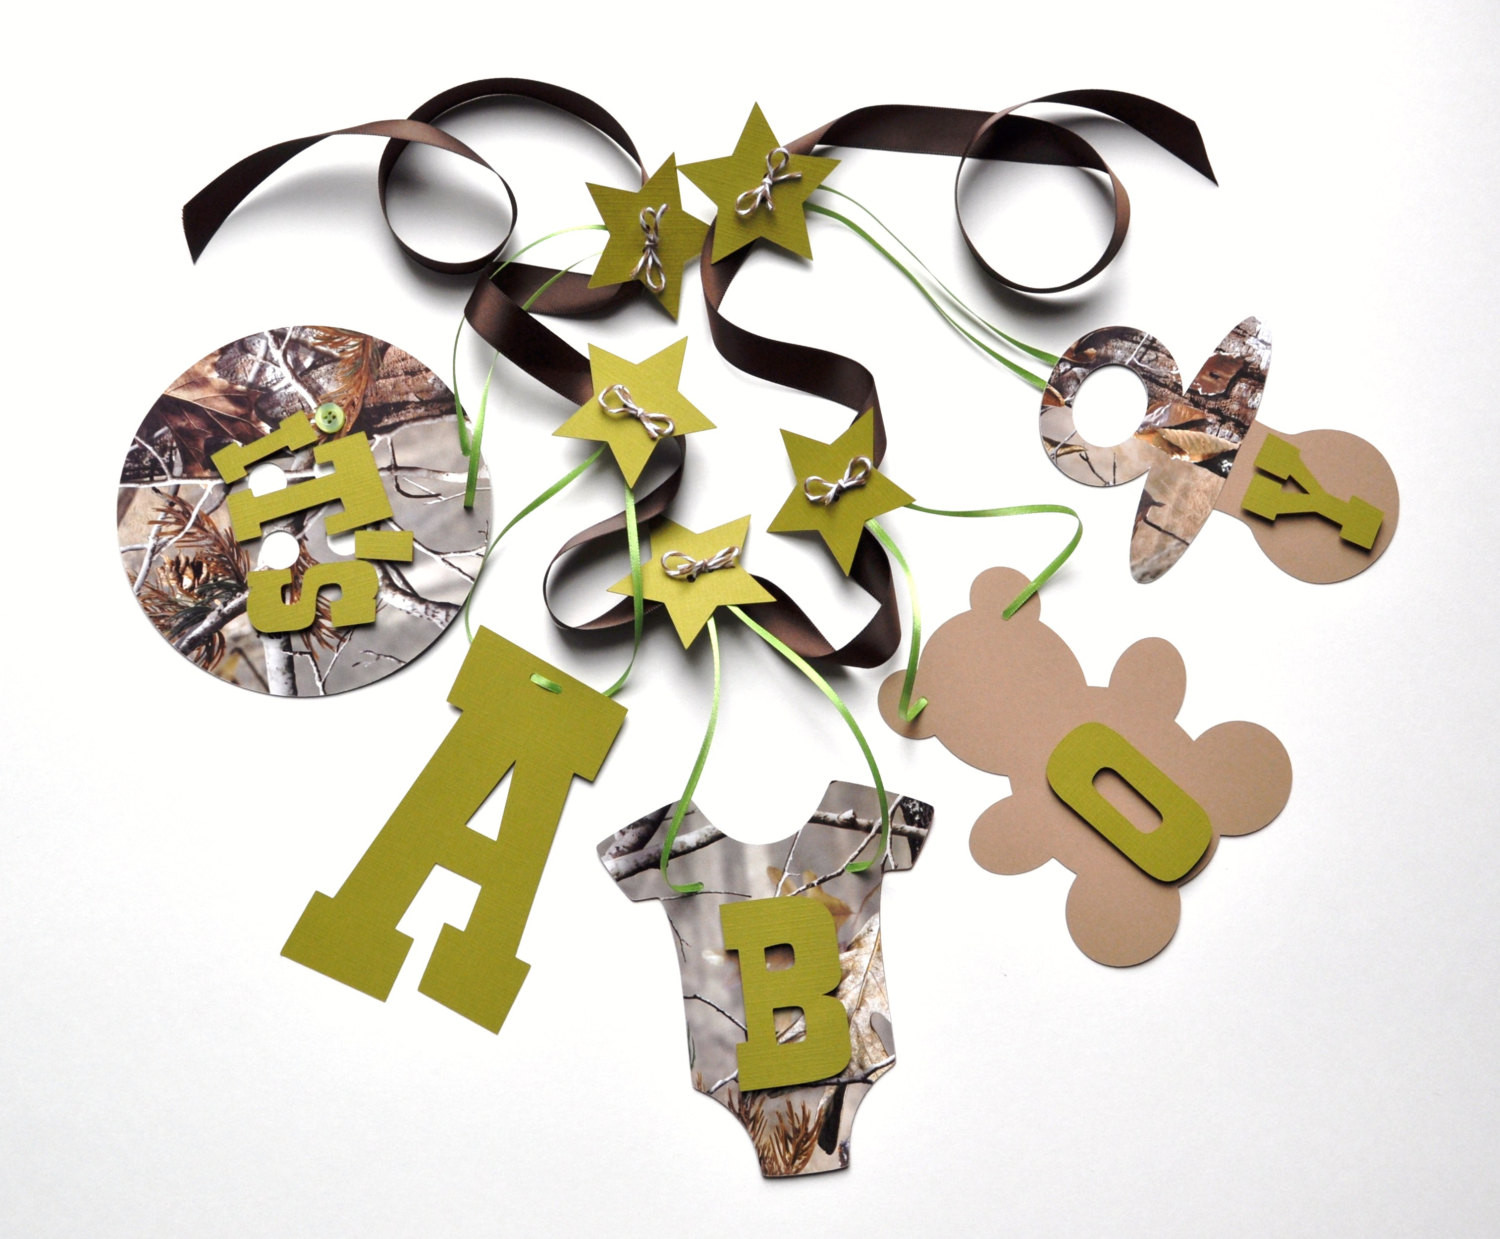 Camouflage Baby Shower Decorating Ideas
 Realtree Camo baby shower decorations It s a boy banner by